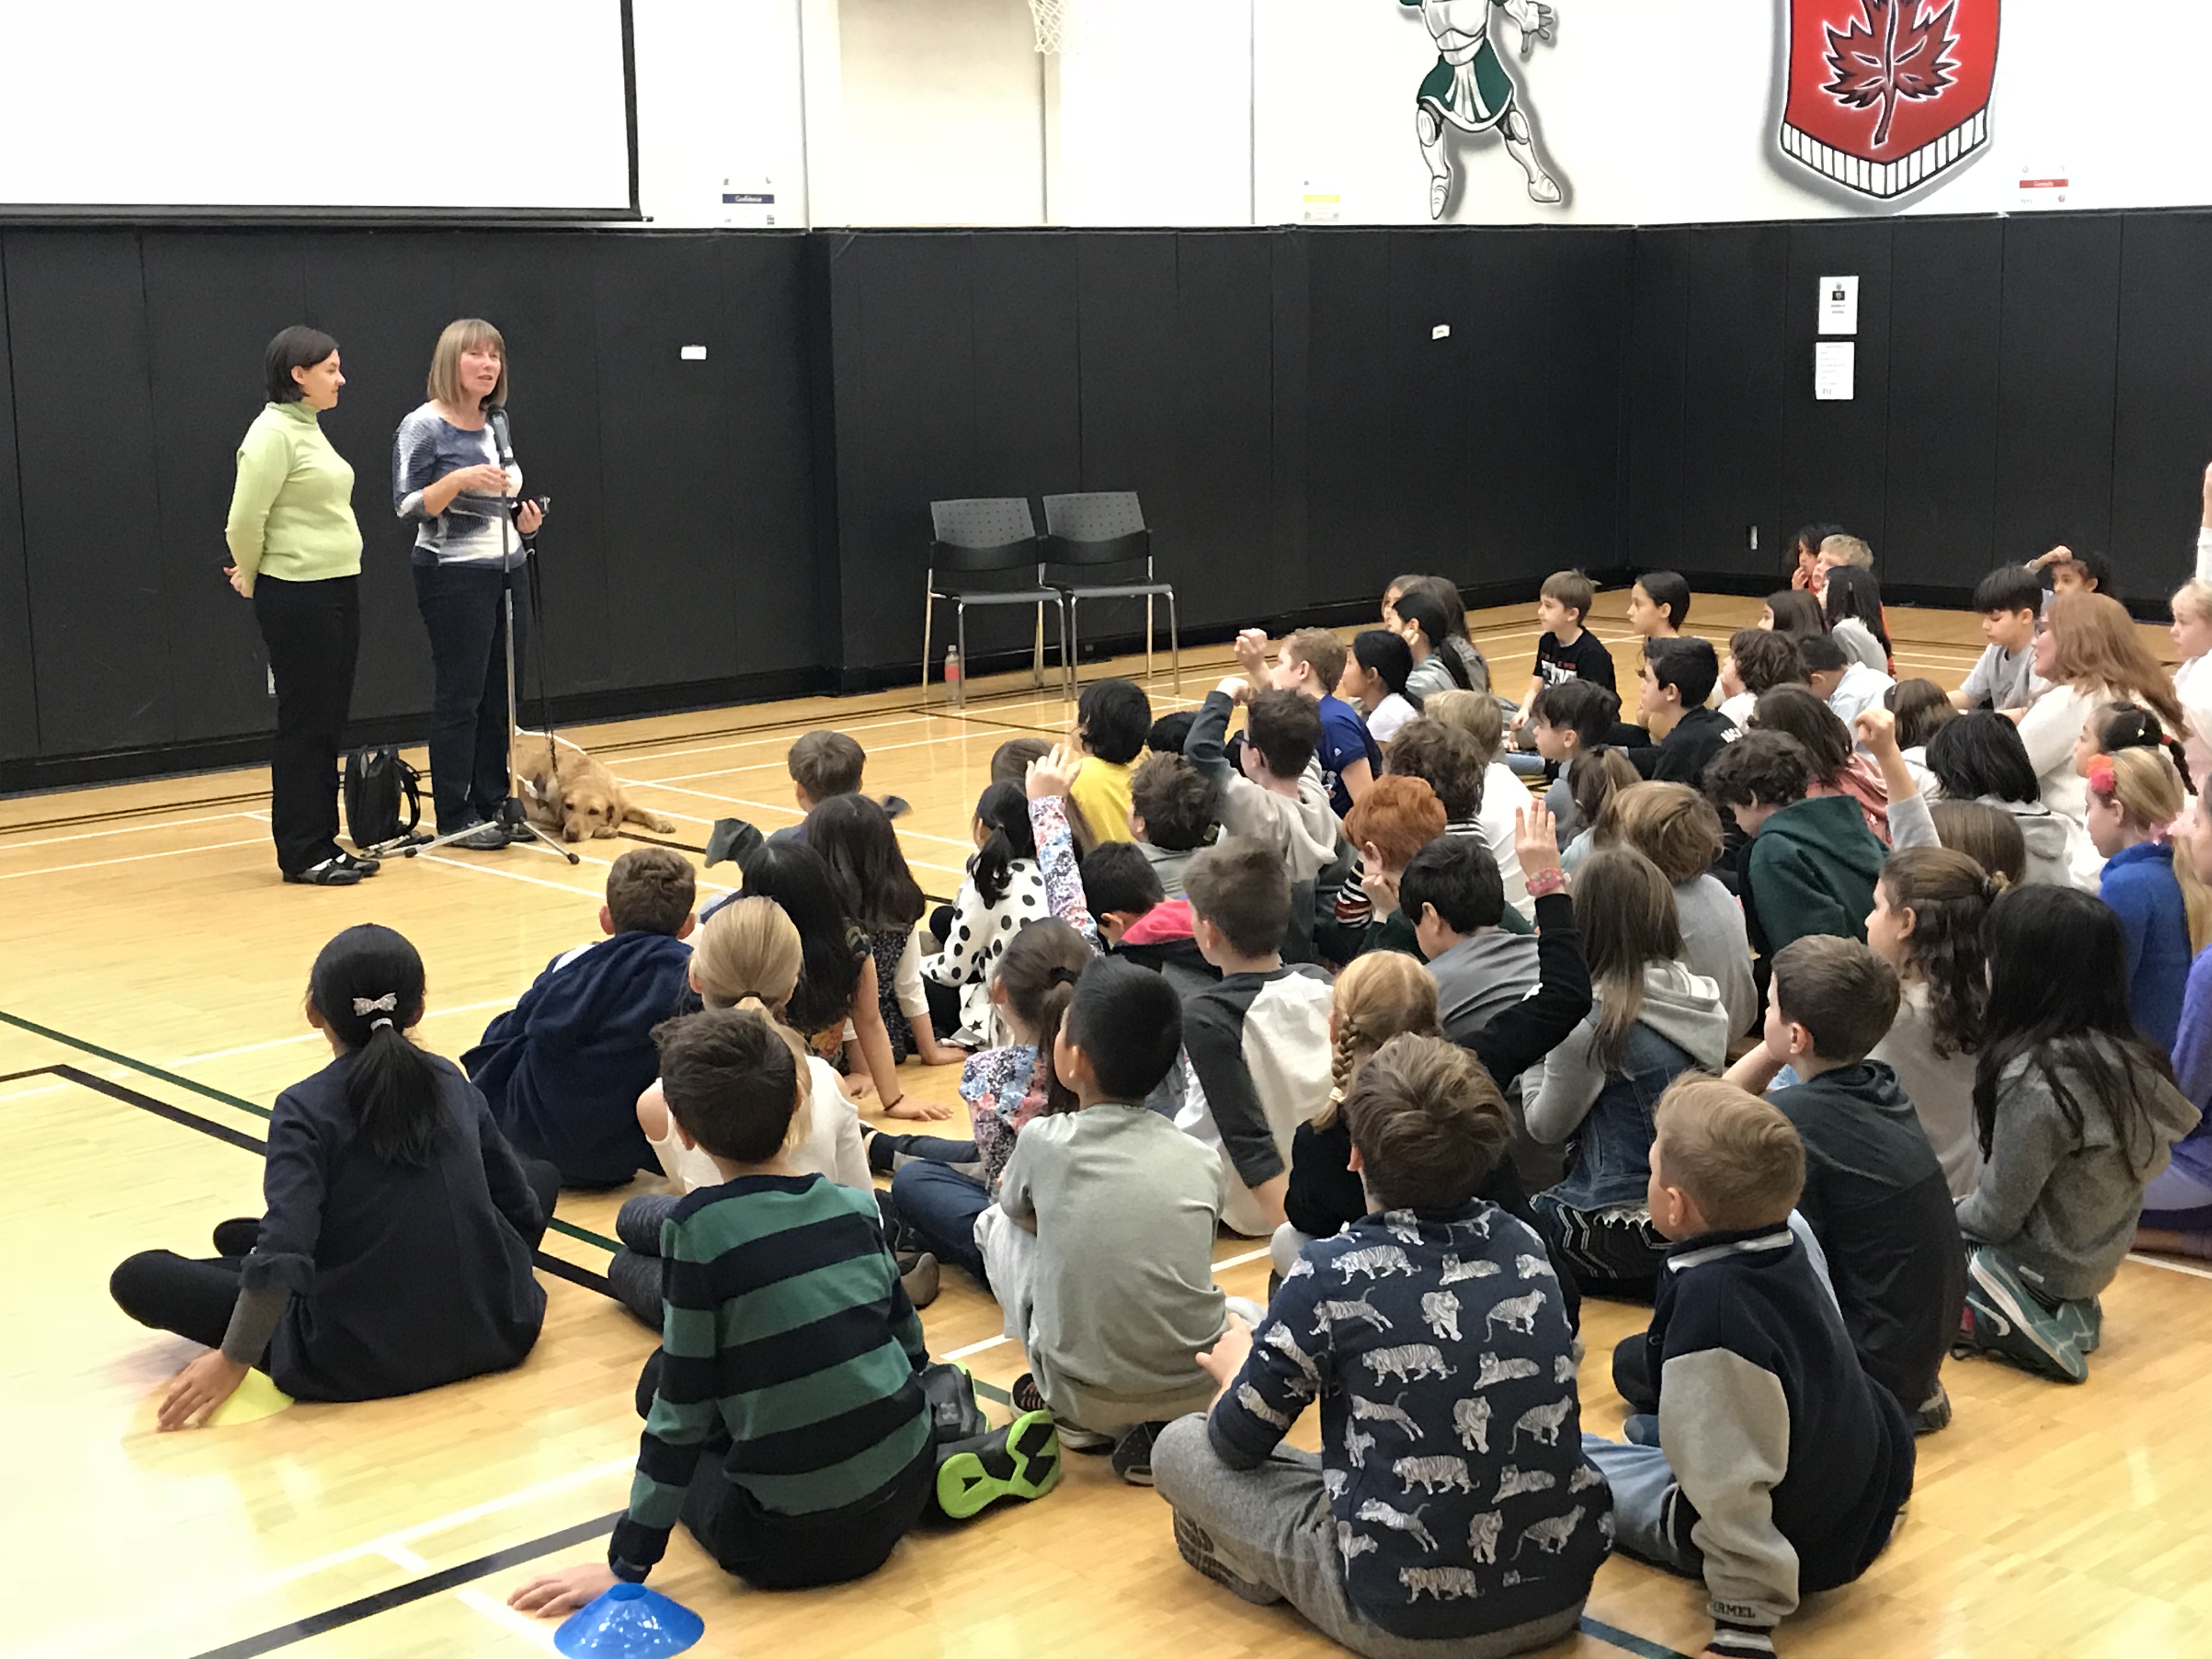 Two Community Engagement Volunteers deliver a presentation in front of a large group of school-aged children sitting in a gymnasium.